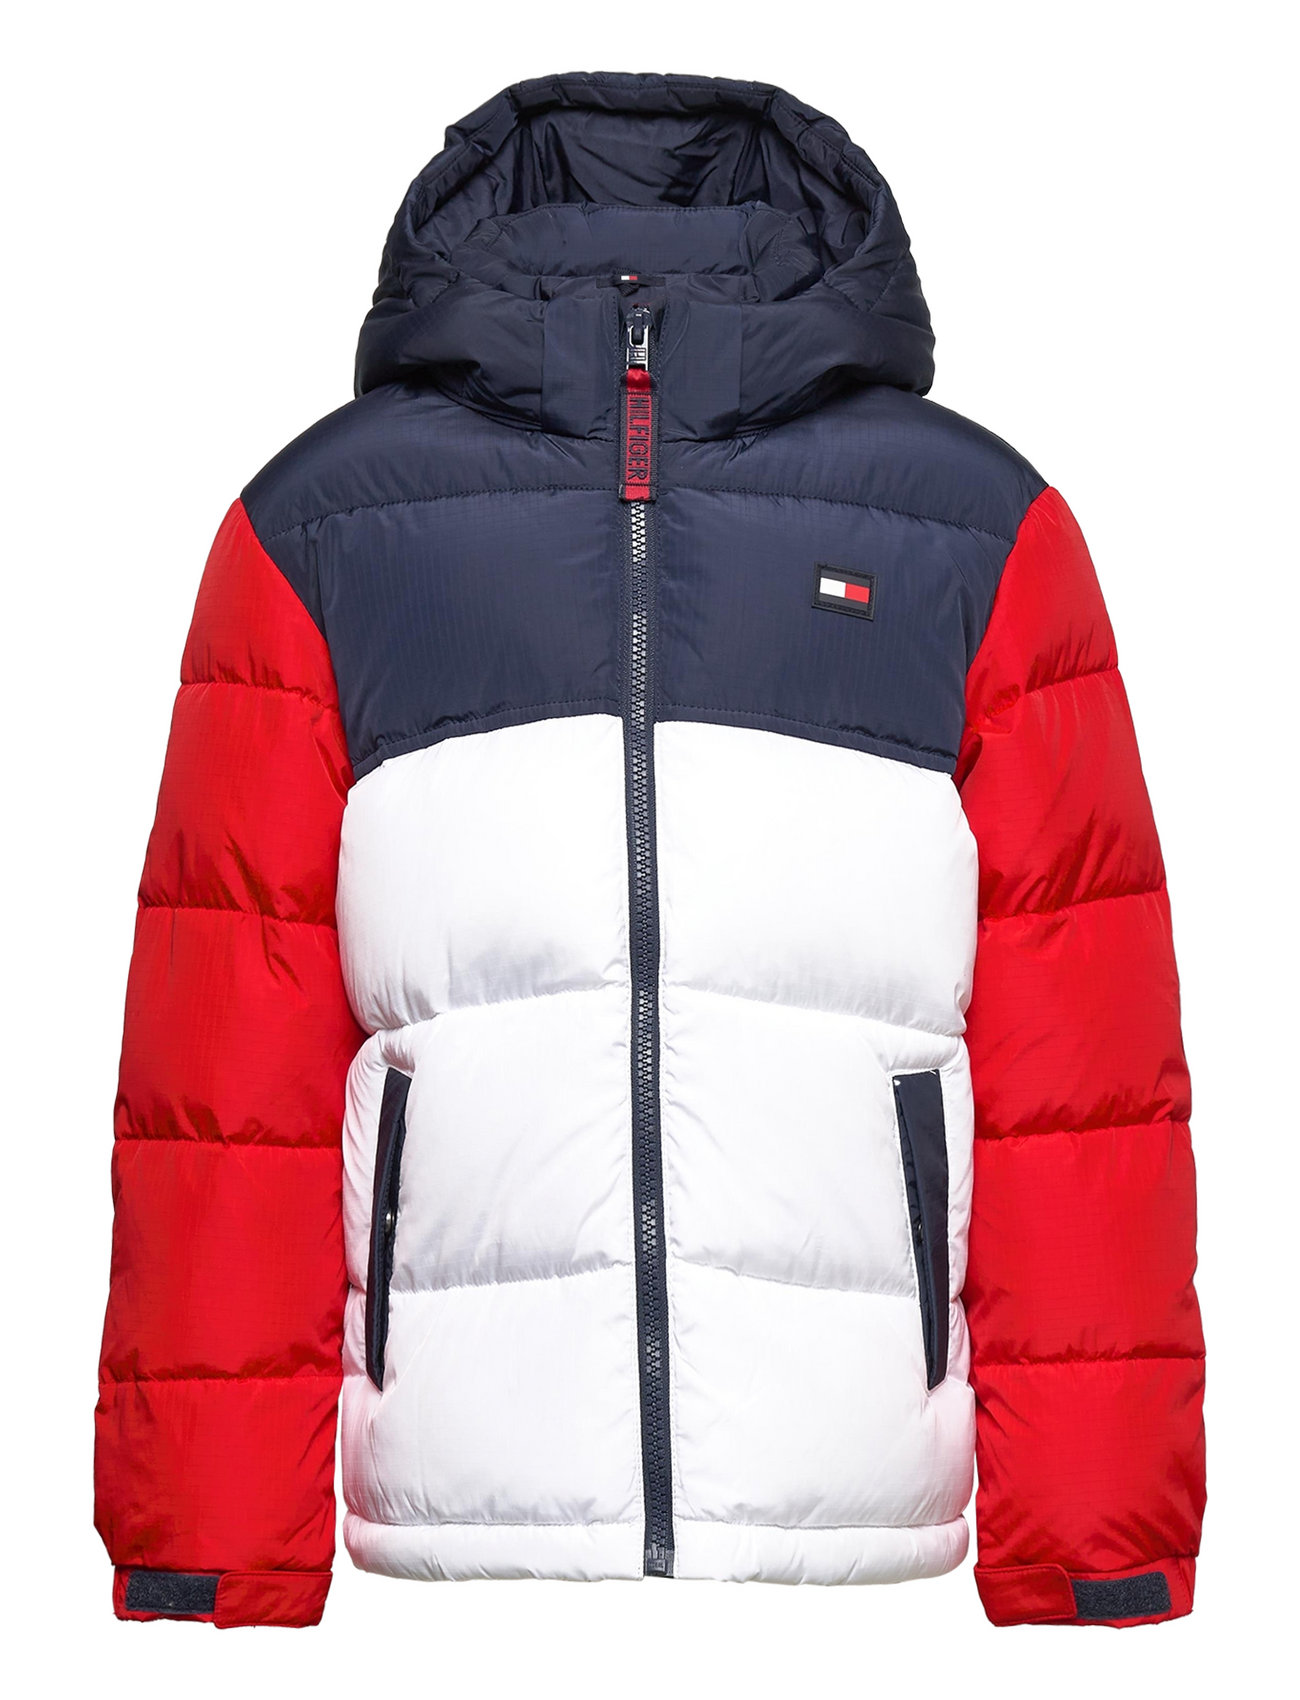 Tommy Hilfiger Alaska Colourblock Puffer Jacket - 239.90 €. Buy Puffer Padded from Tommy Hilfiger online at Boozt.com. Fast delivery and returns